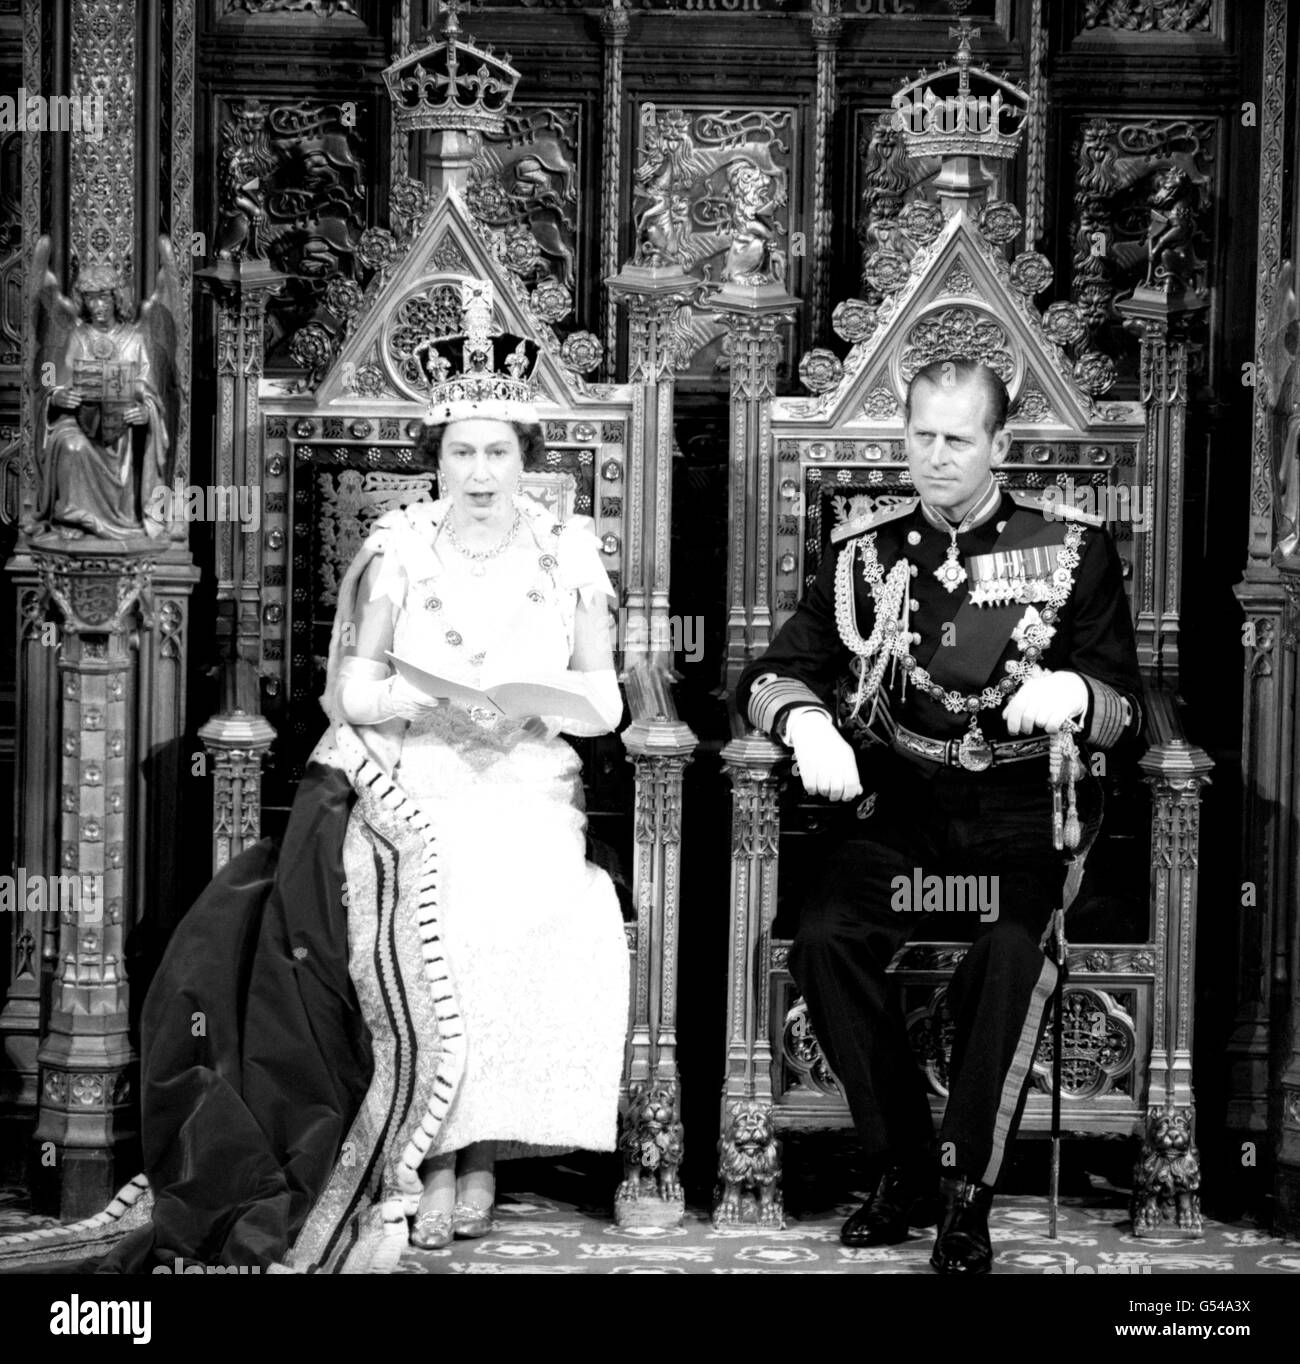 Queen Elizabeth II and the Duke of Edinburgh at the State Opening of Parliament ceremony in the House of Lords. Stock Photo